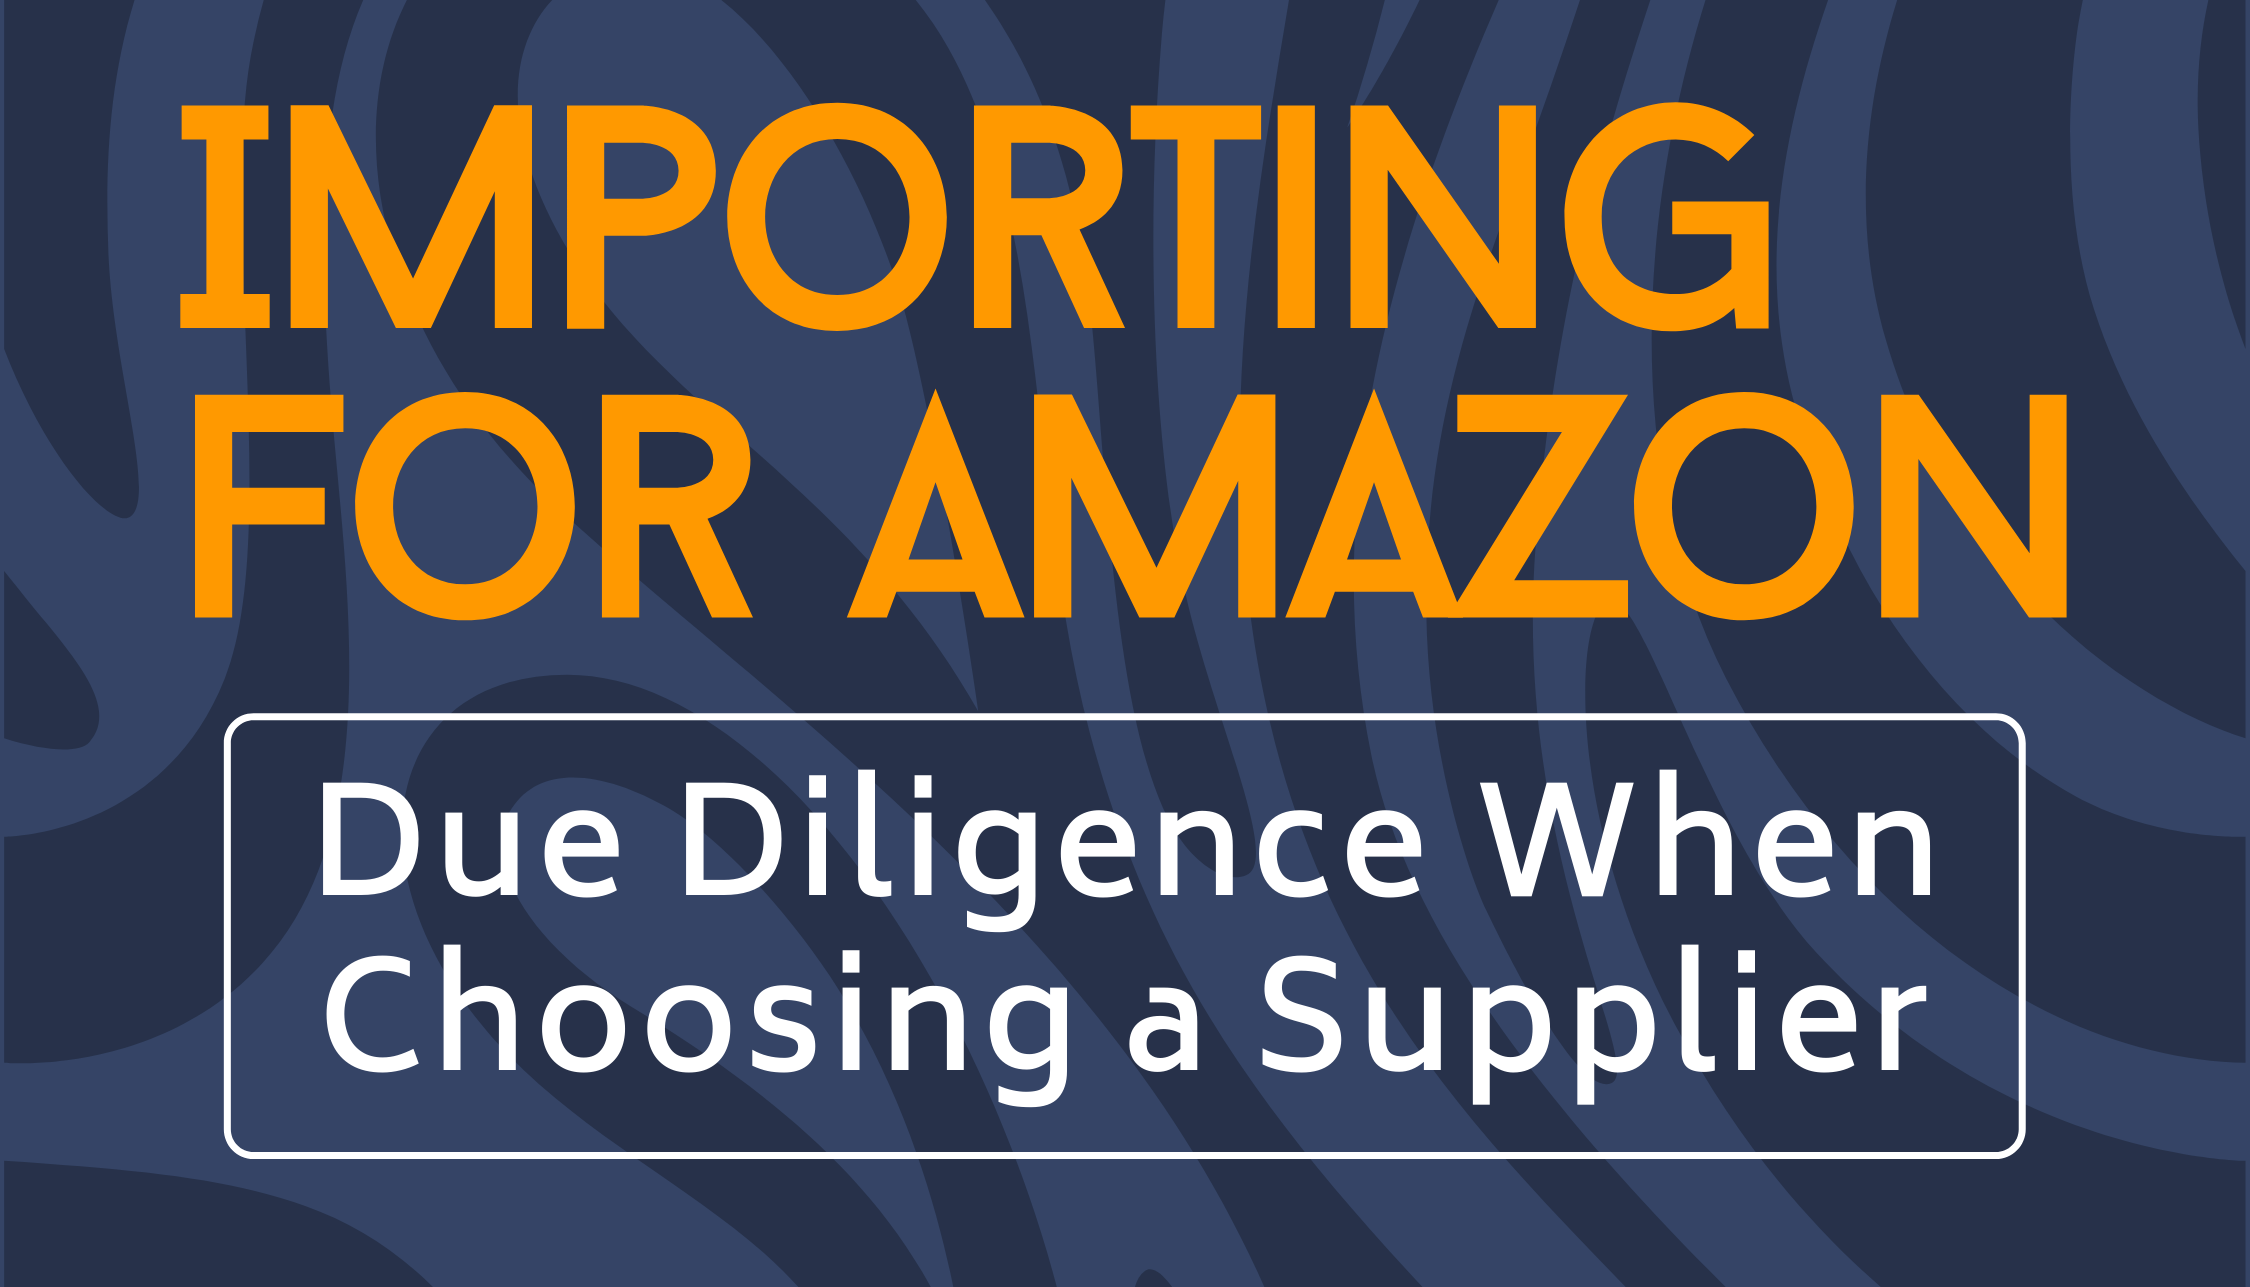 Importing for Amazon | Due Diligence When Choosing a Supplier